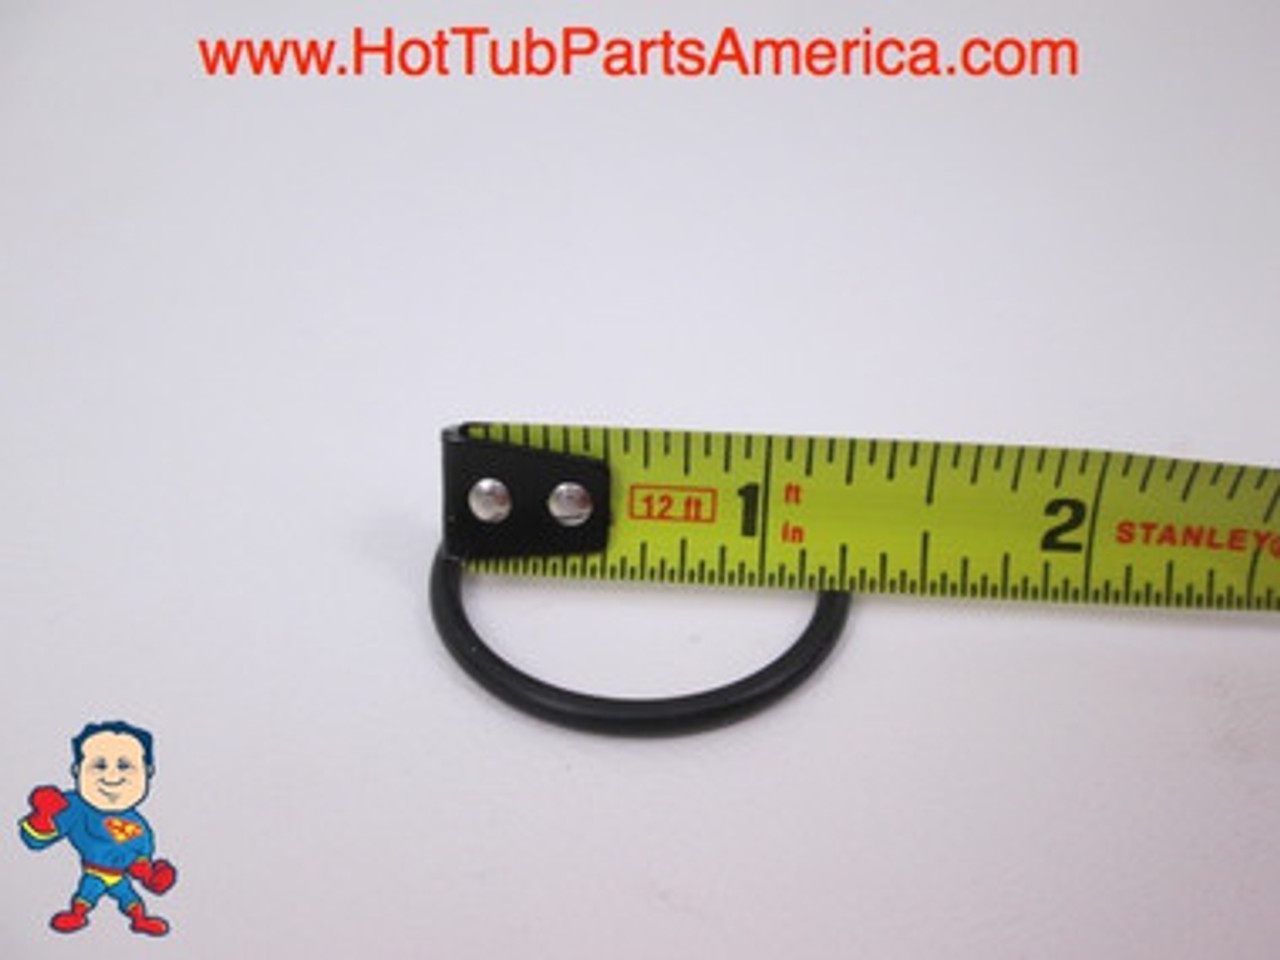 Set of 2 Hot Tub Spa 1" X 1" Slip Pump Union O-Ring Use Tiny Might other Video